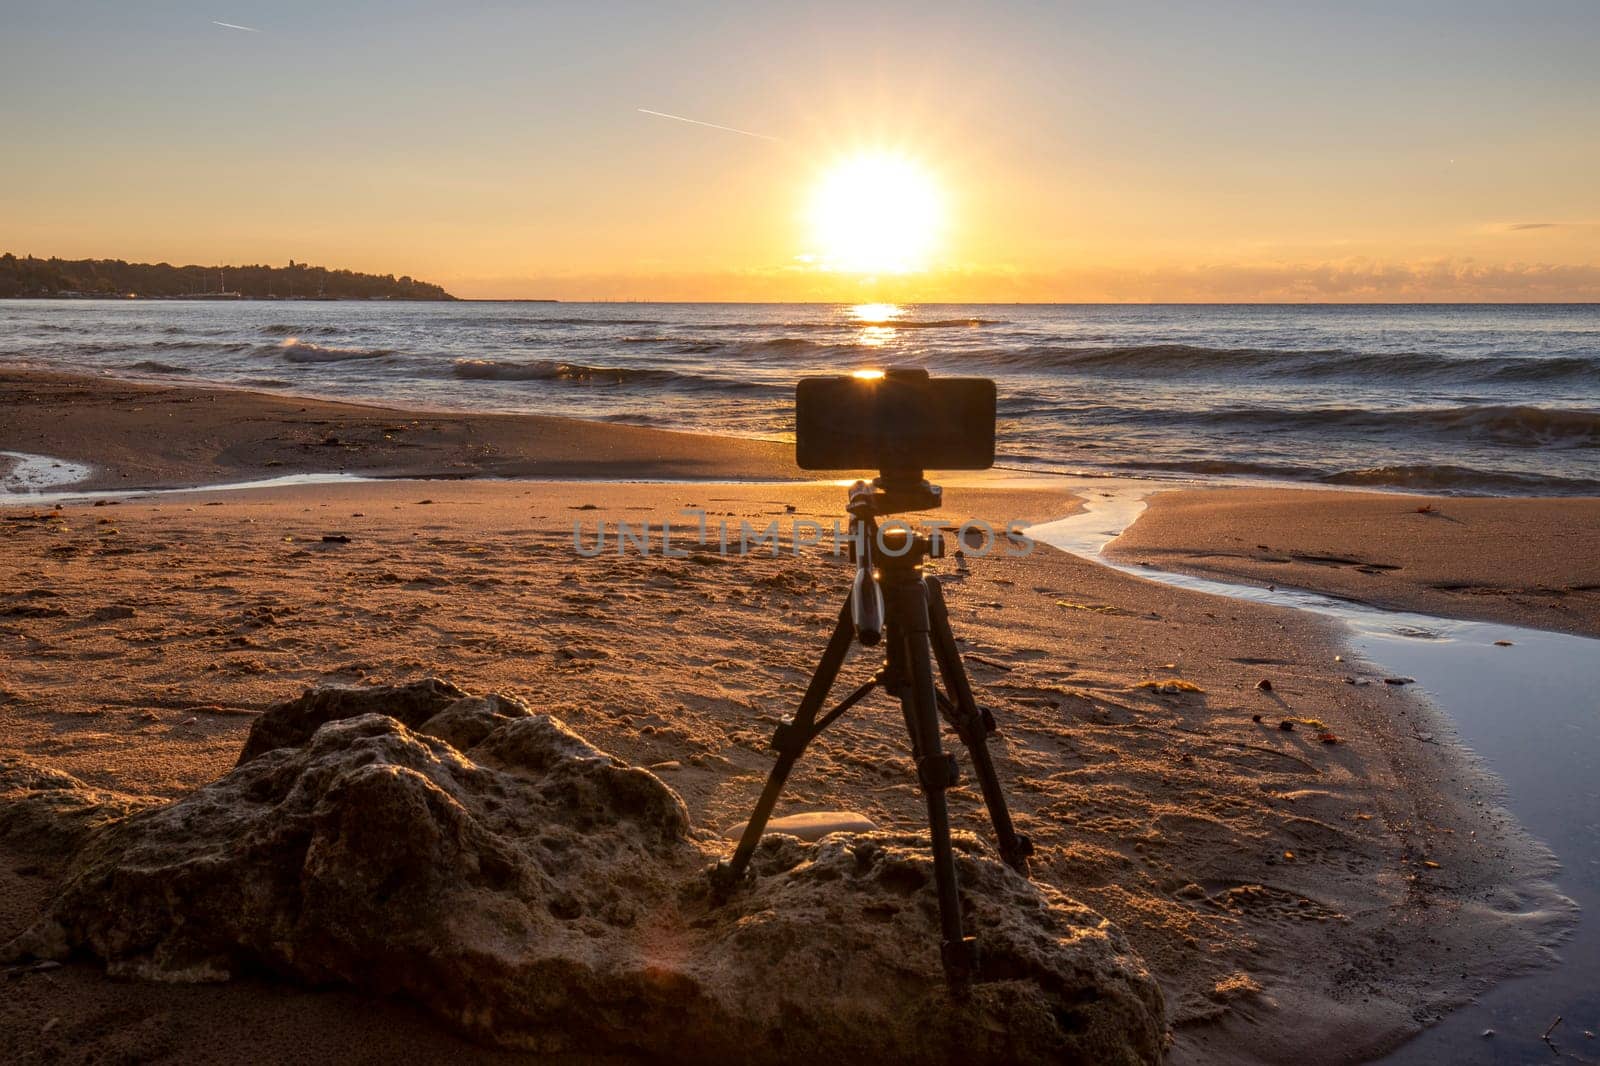 A telephone on a tripod standing on the beach shooting sunrise